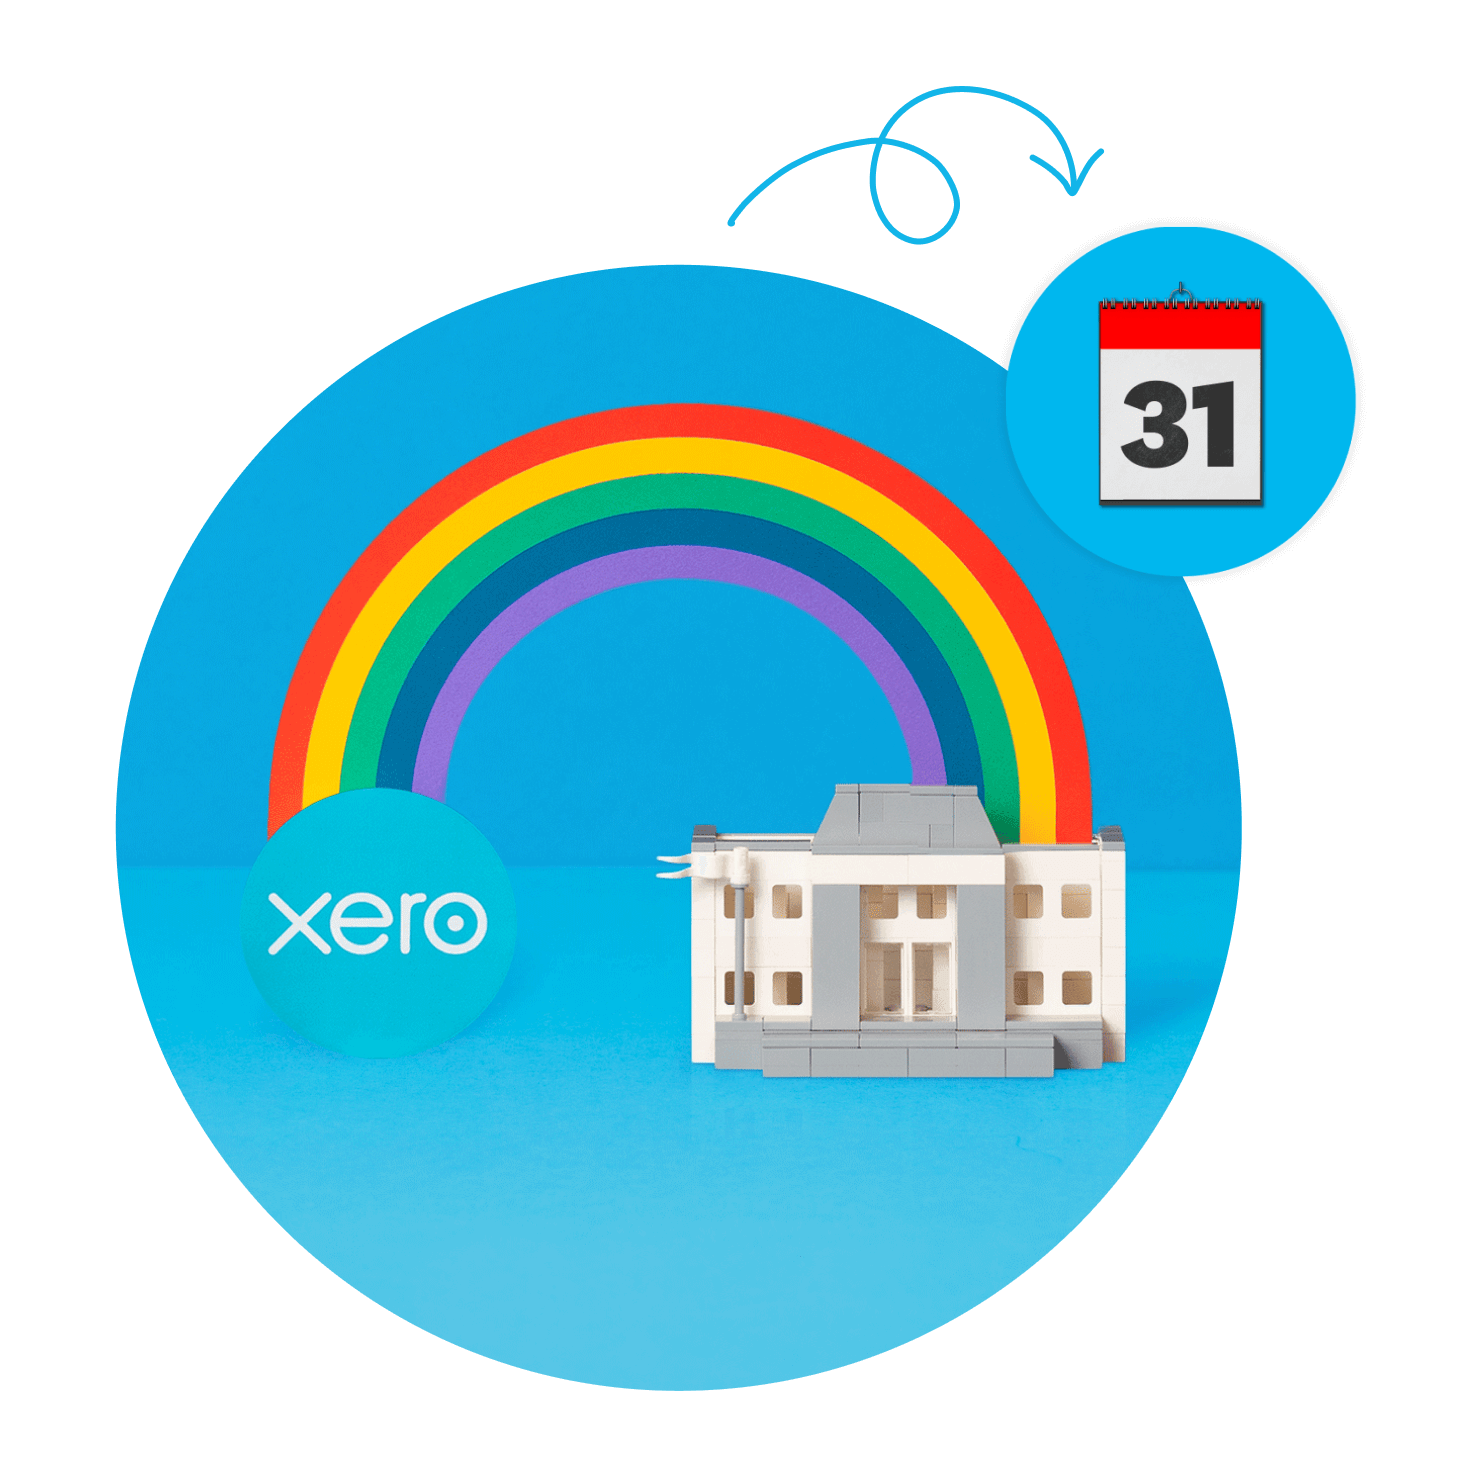 Xero has eInvoicing built in, so you’re ready to send eInvoices to central government.